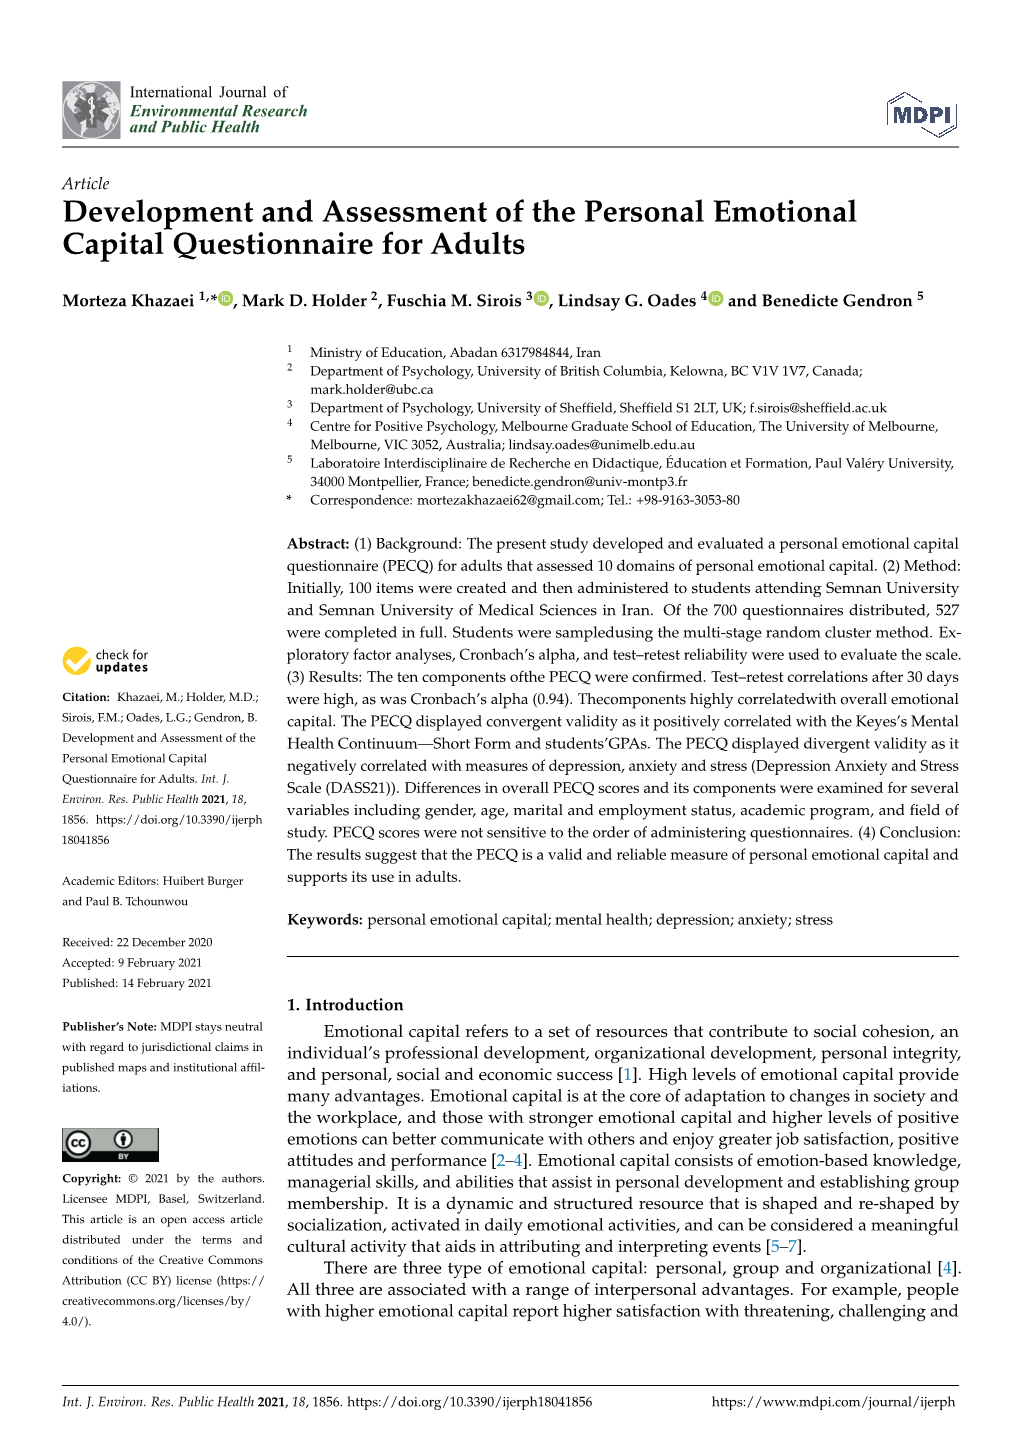 Development and Assessment of the Personal Emotional Capital Questionnaire for Adults